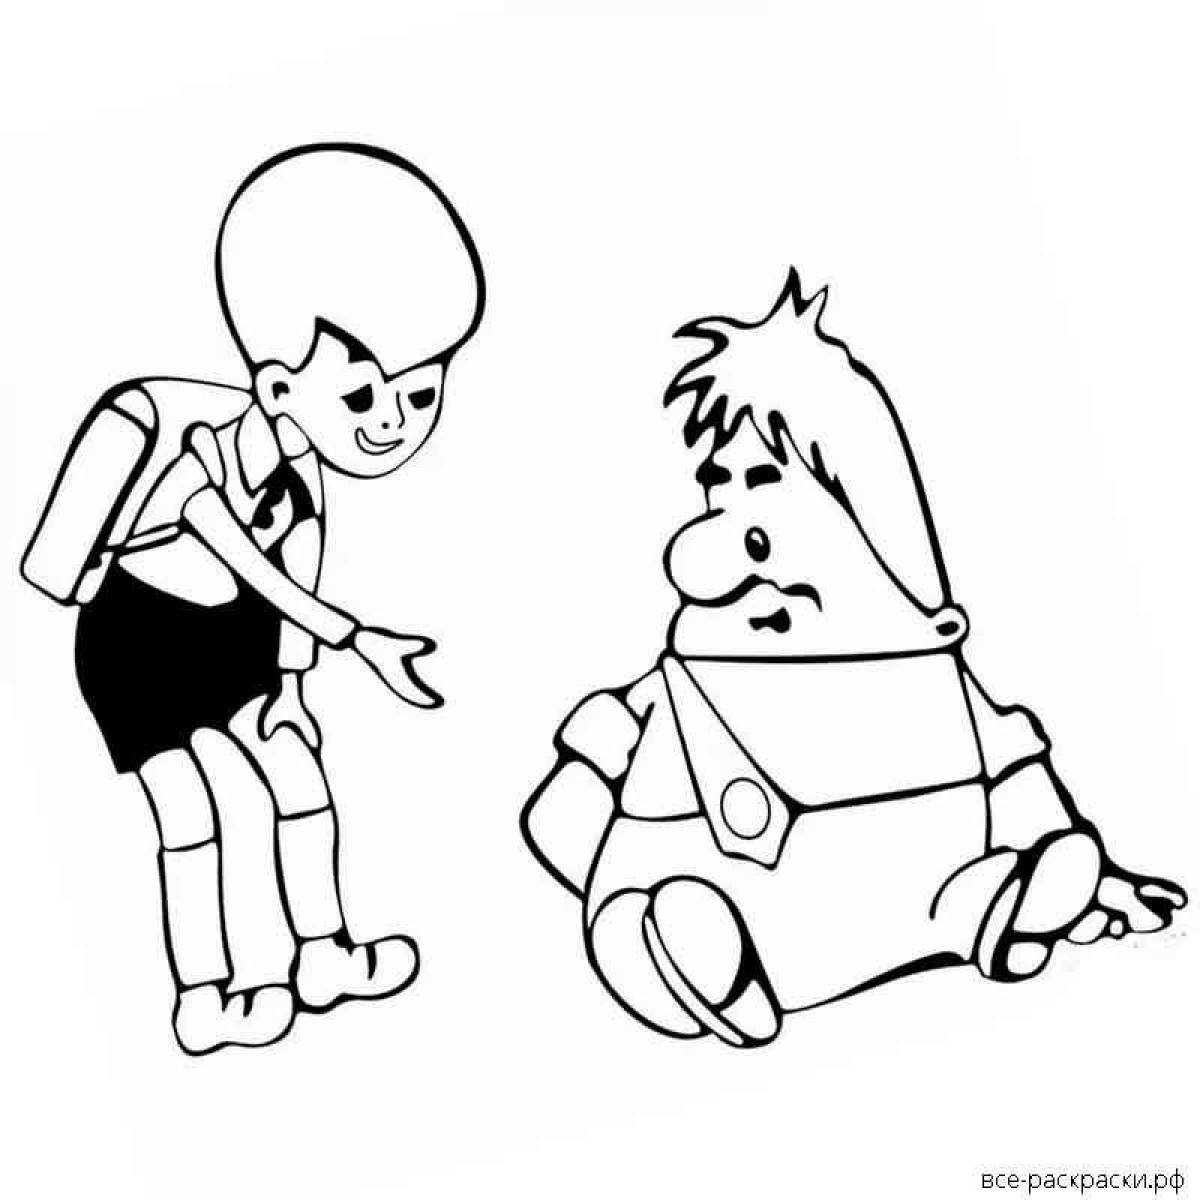 Color-explosion coloring page kid and carlson